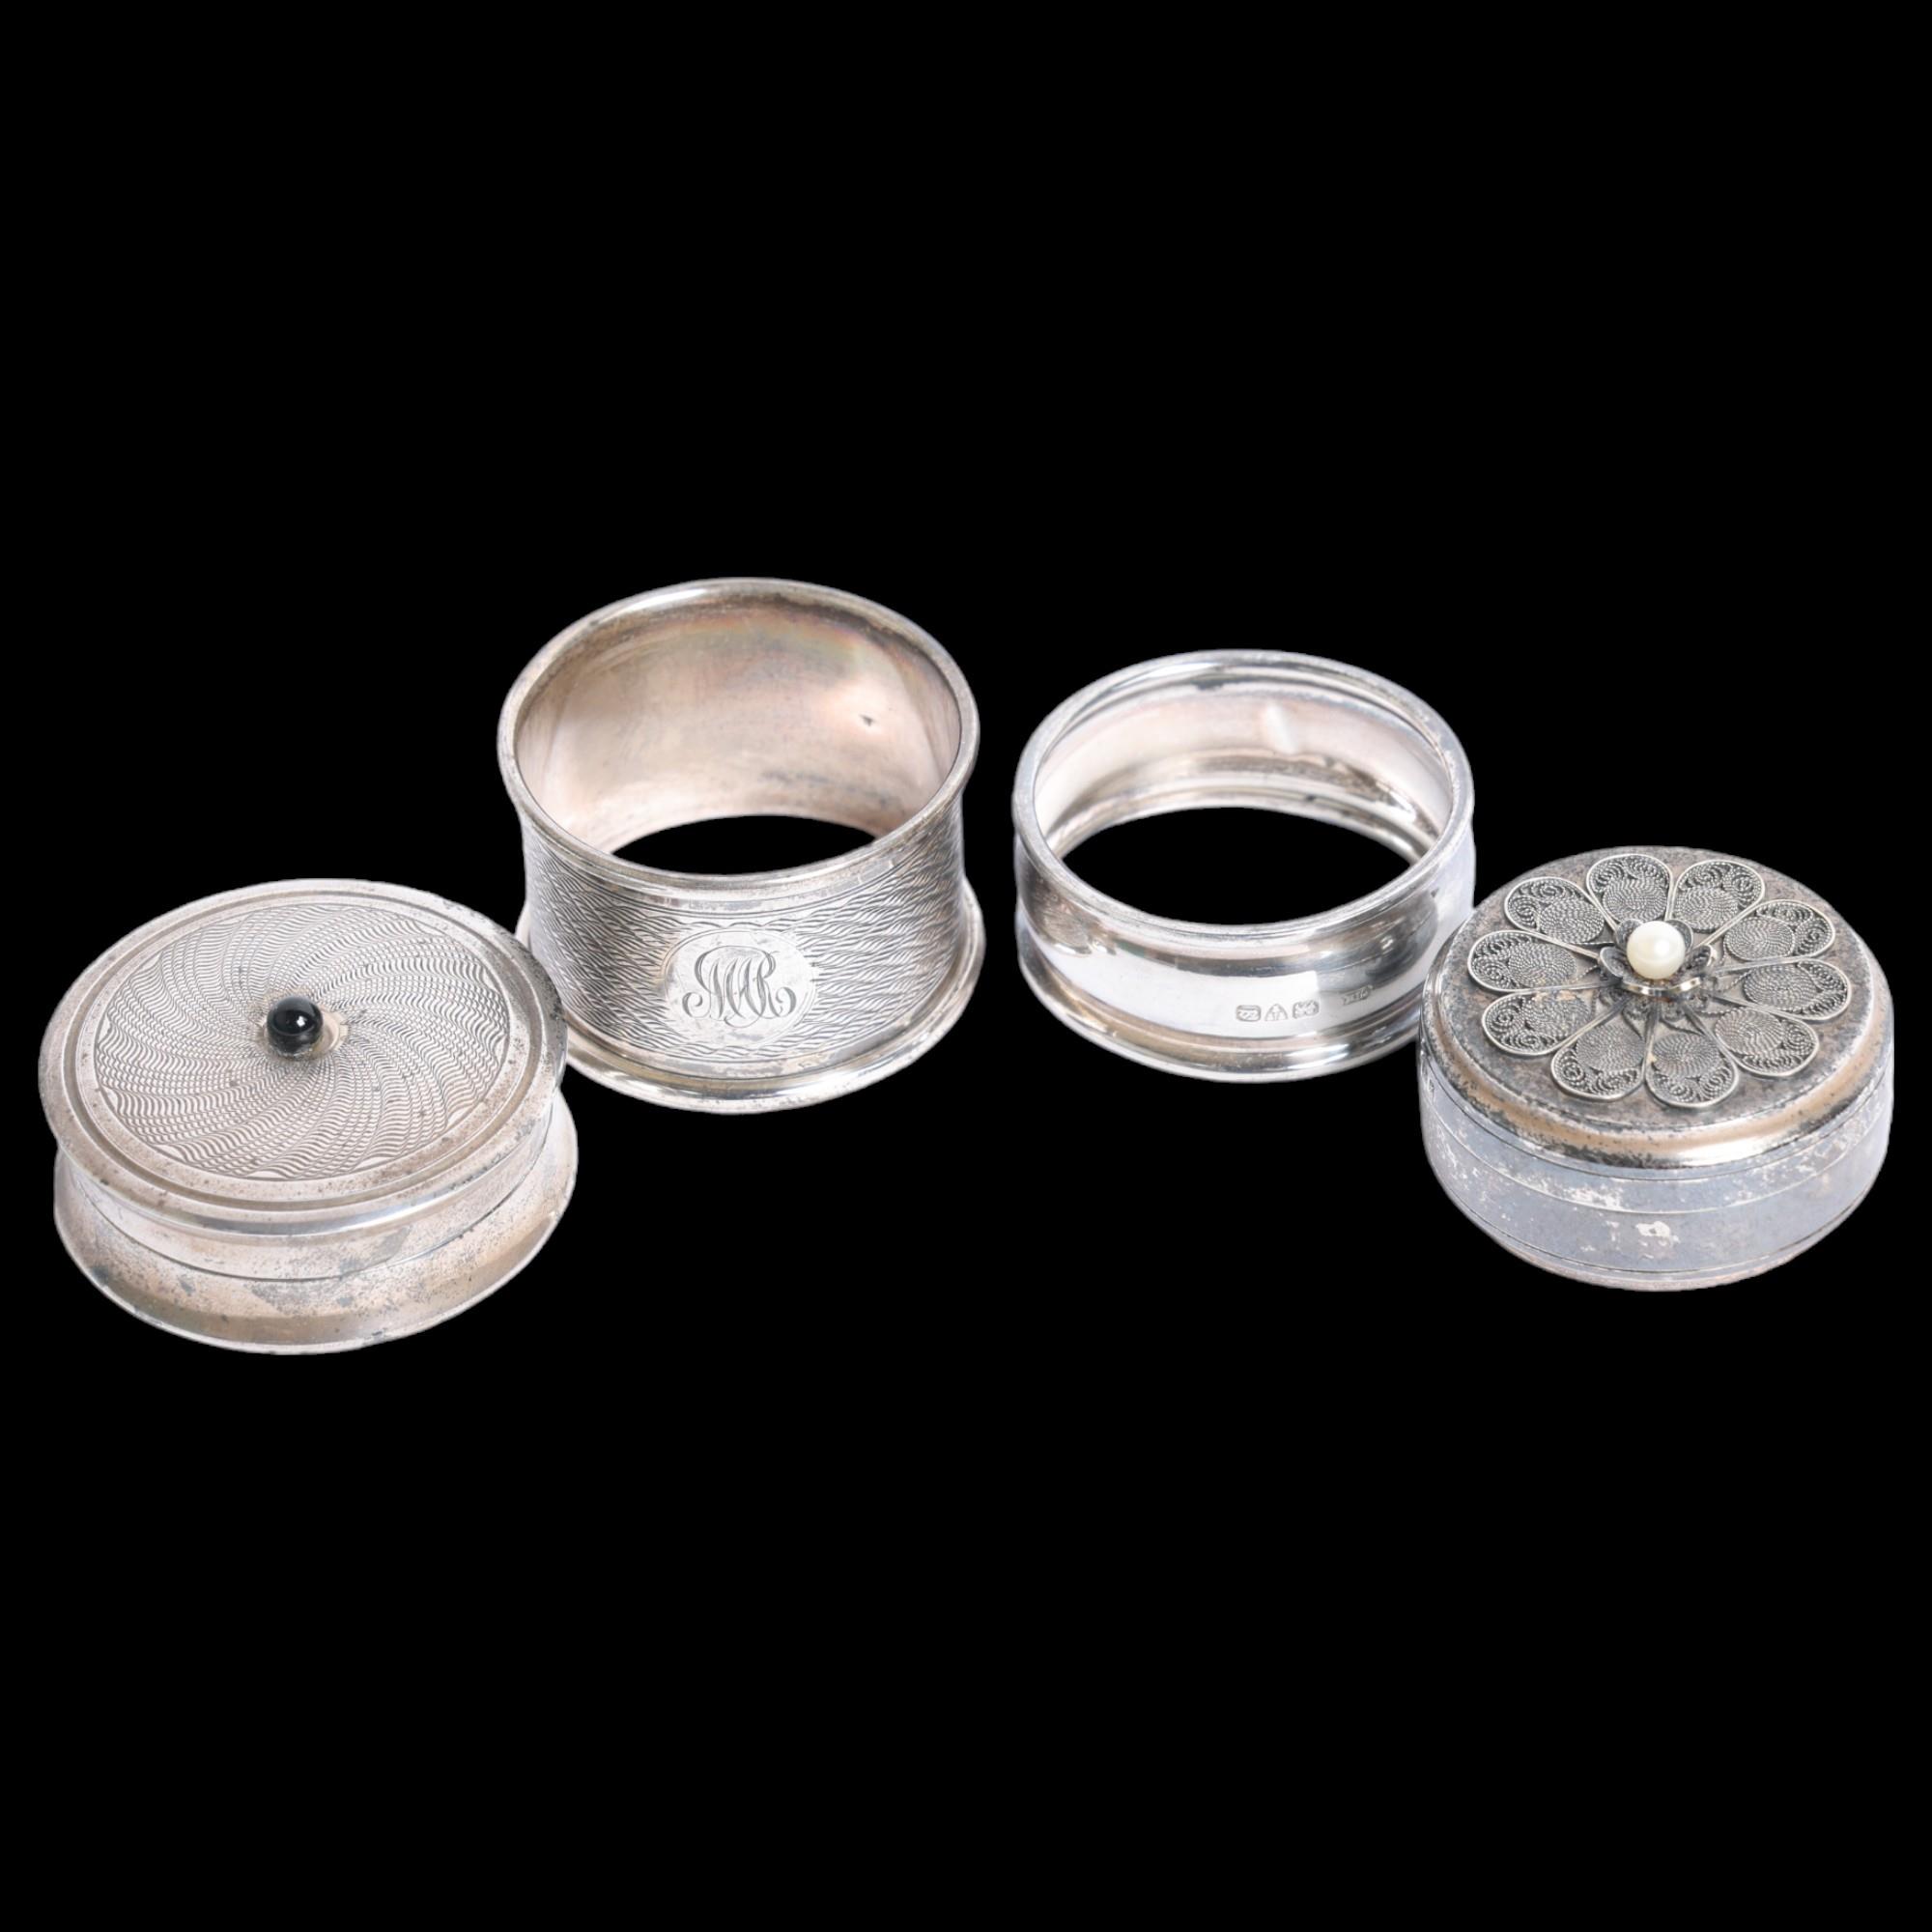 2 modern silver circular pillboxes and covers, and 2 silver napkin rings